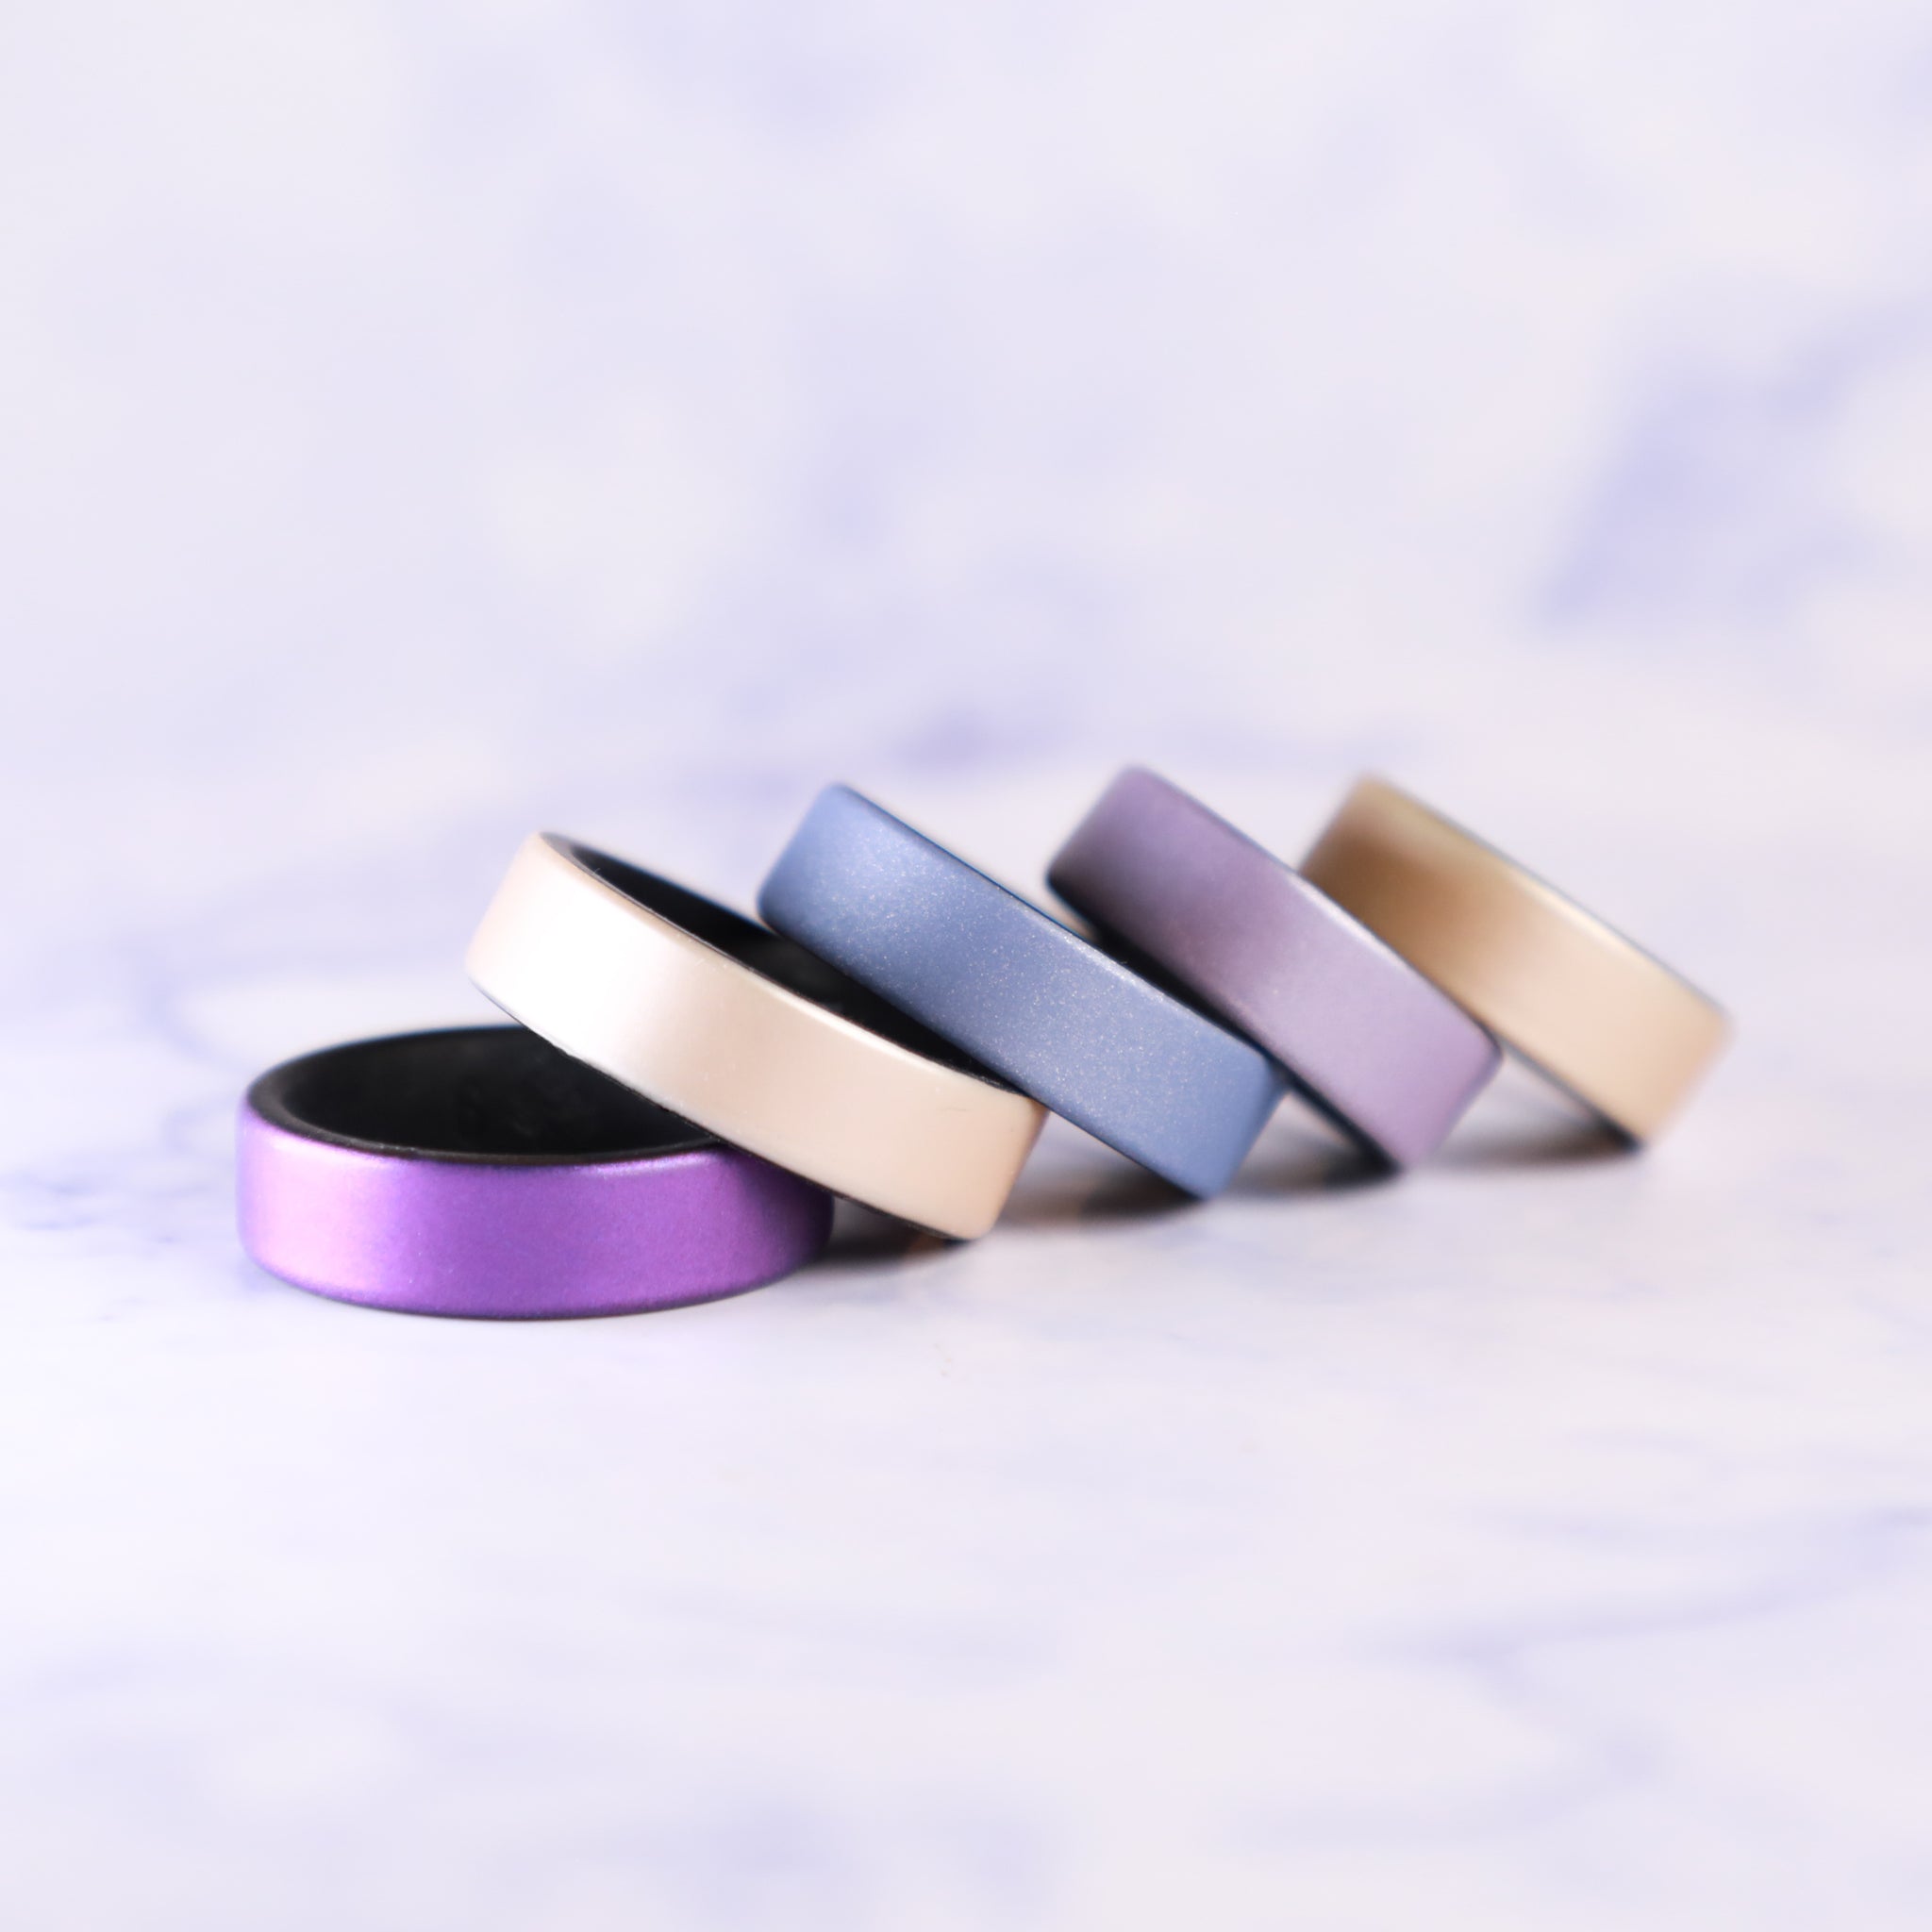 Amethyst Purple Dual Layer Breathable Silicone Ring